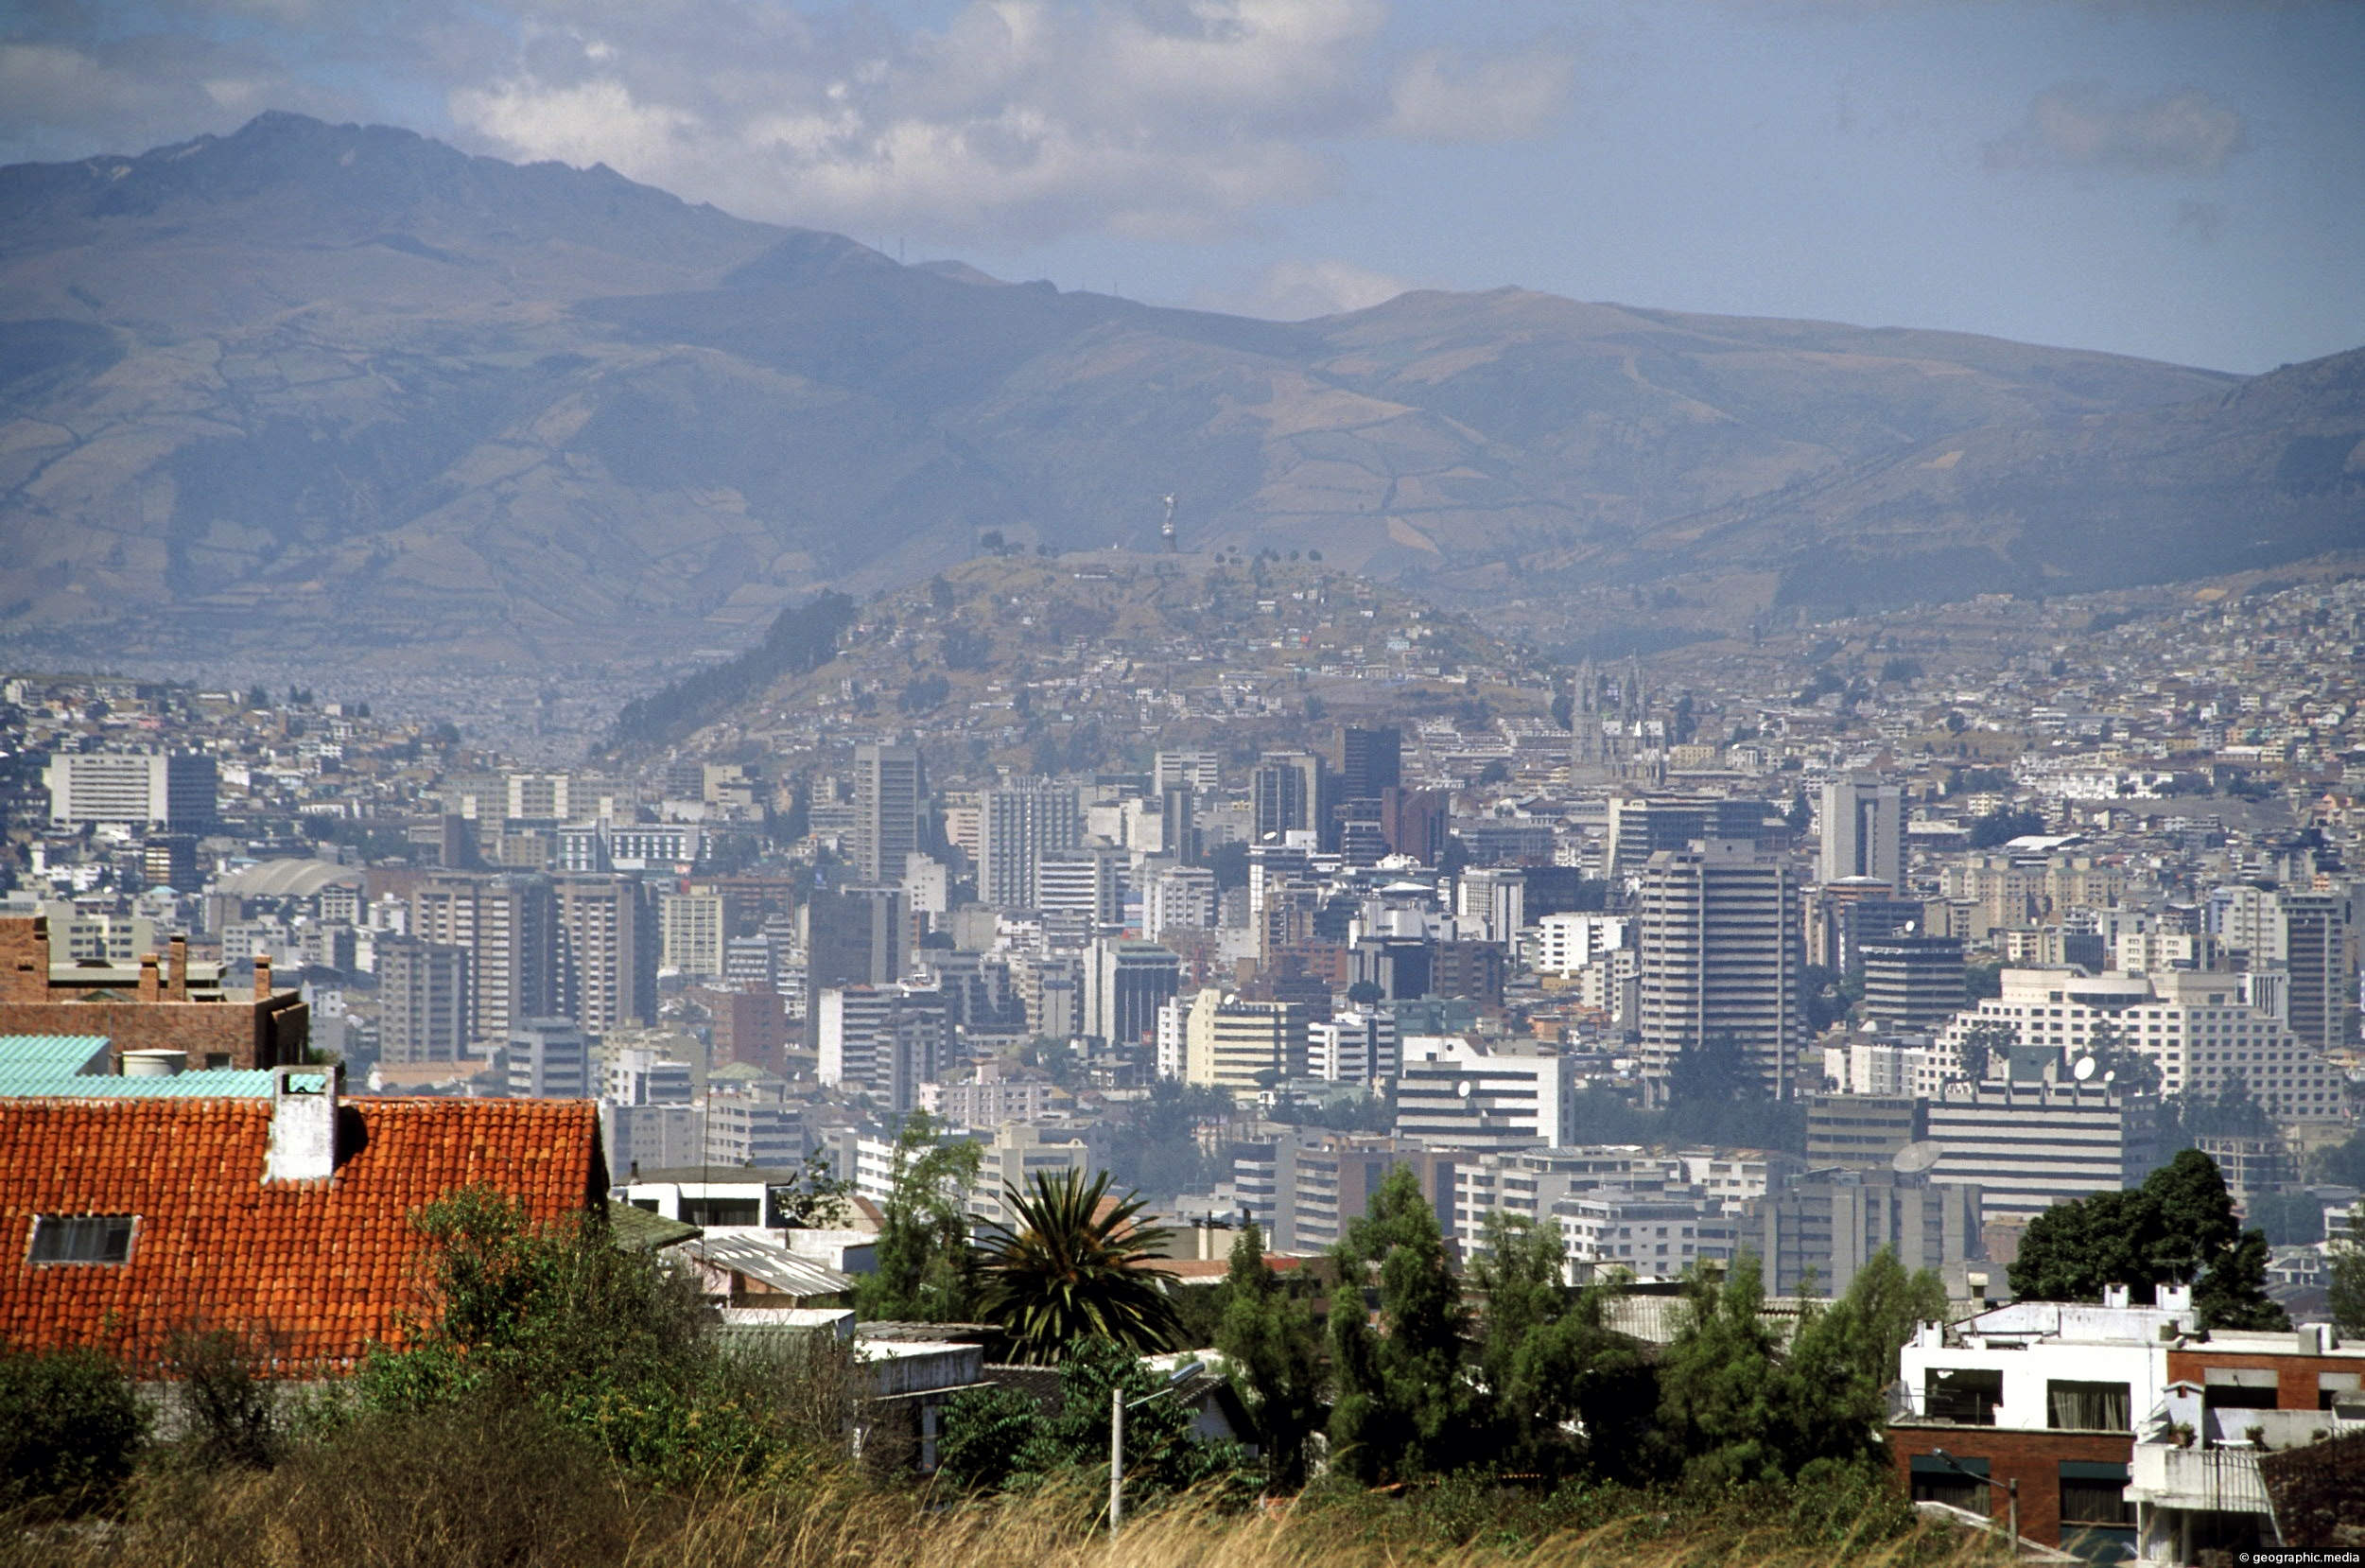 View of Quito from Calle Guanguiltagua